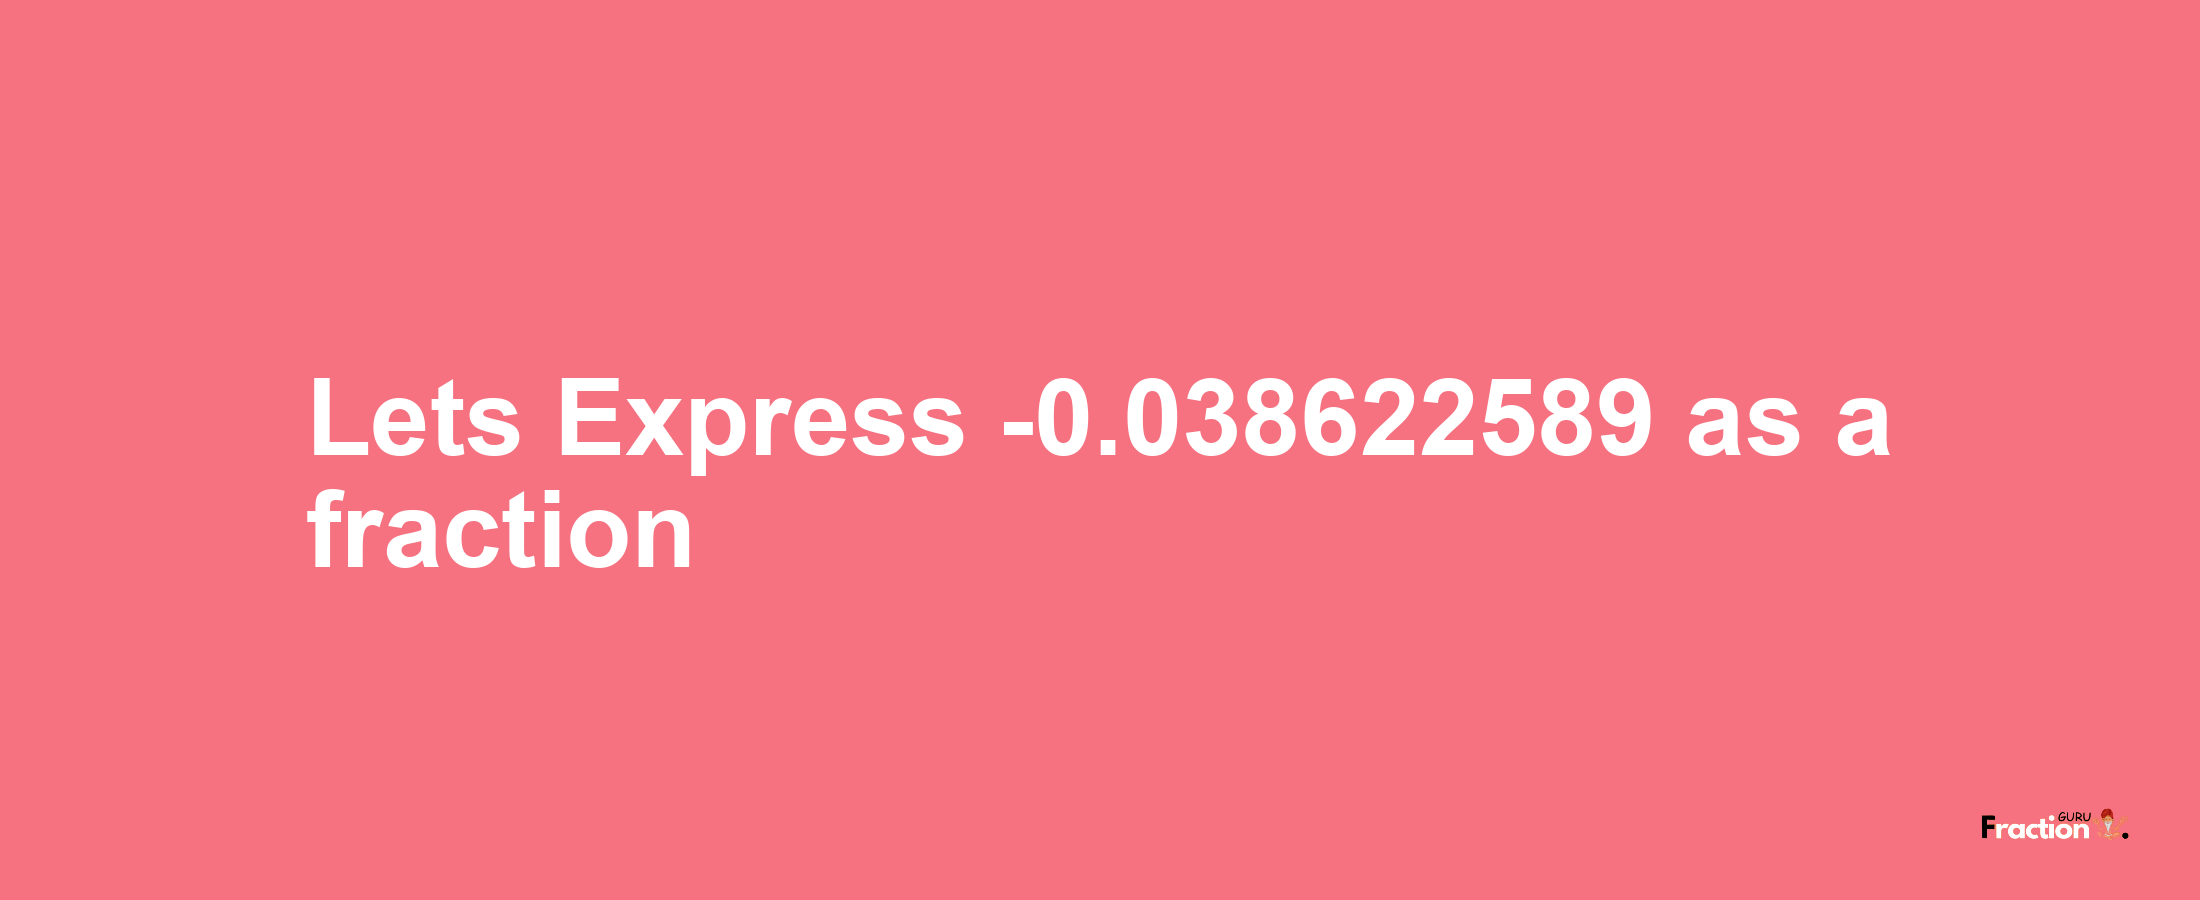 Lets Express -0.038622589 as afraction